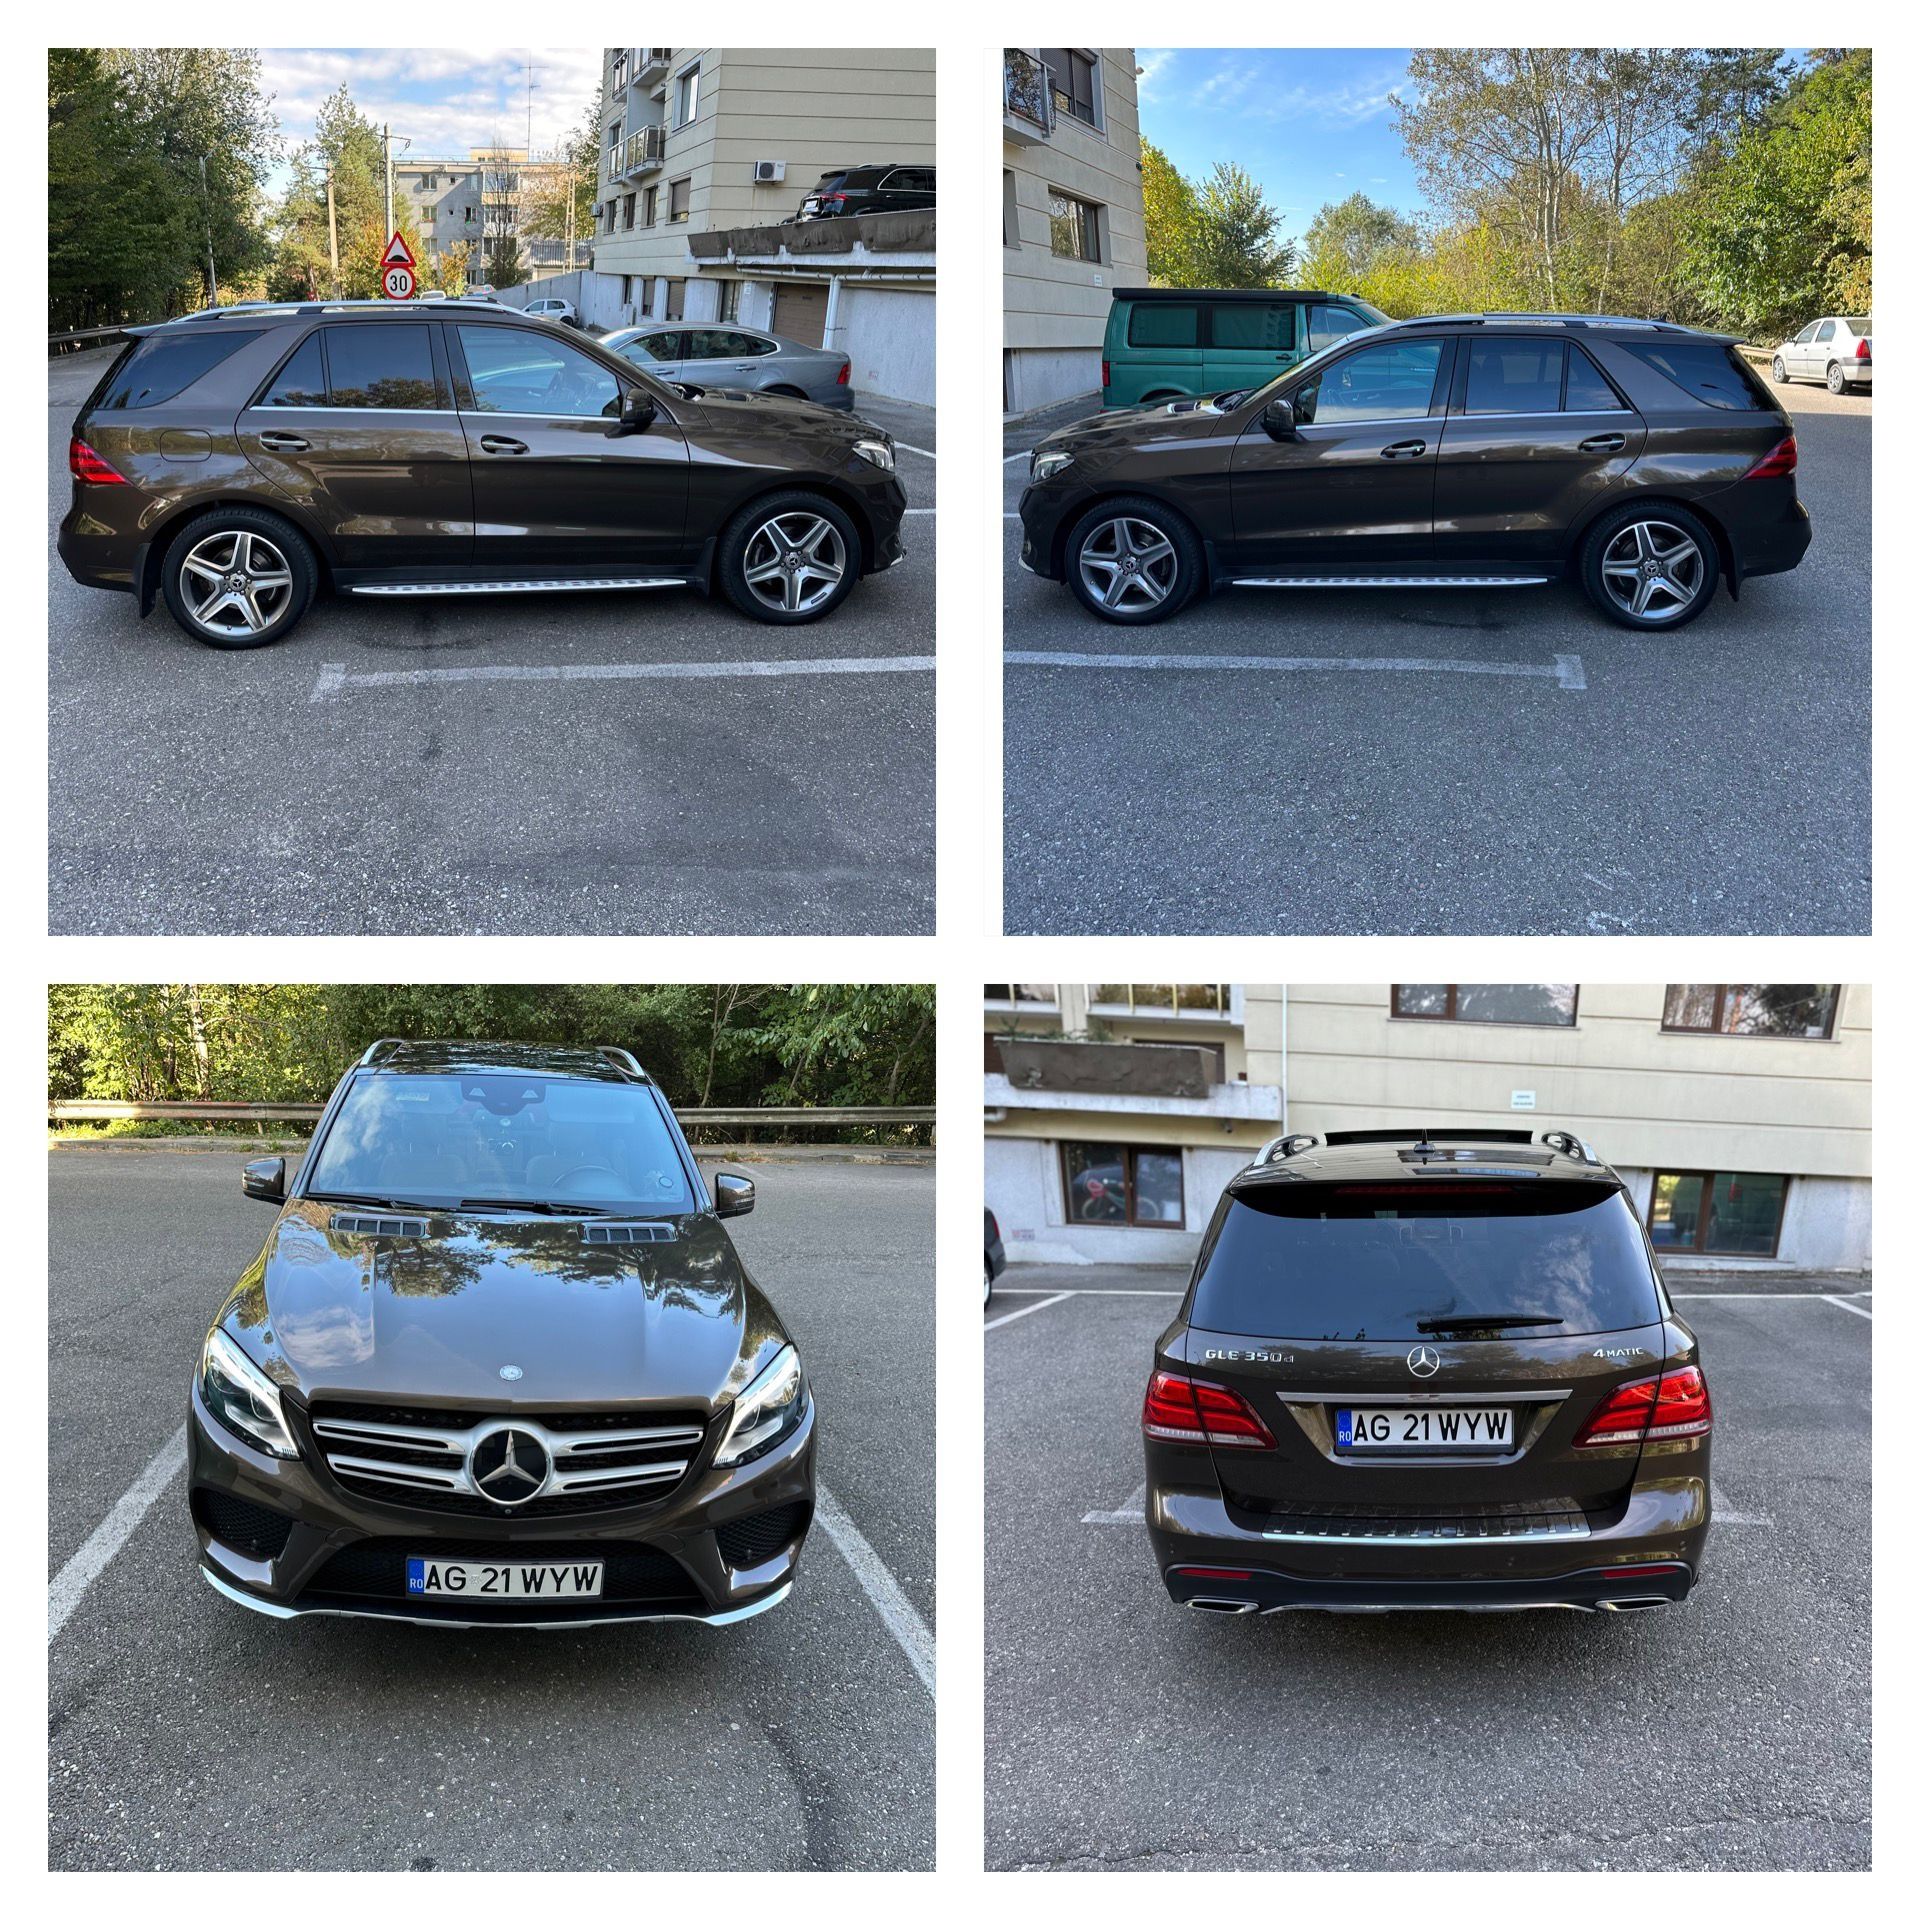 Mercedes Gle 350 / AMG / Perne / Distronic / Panorama